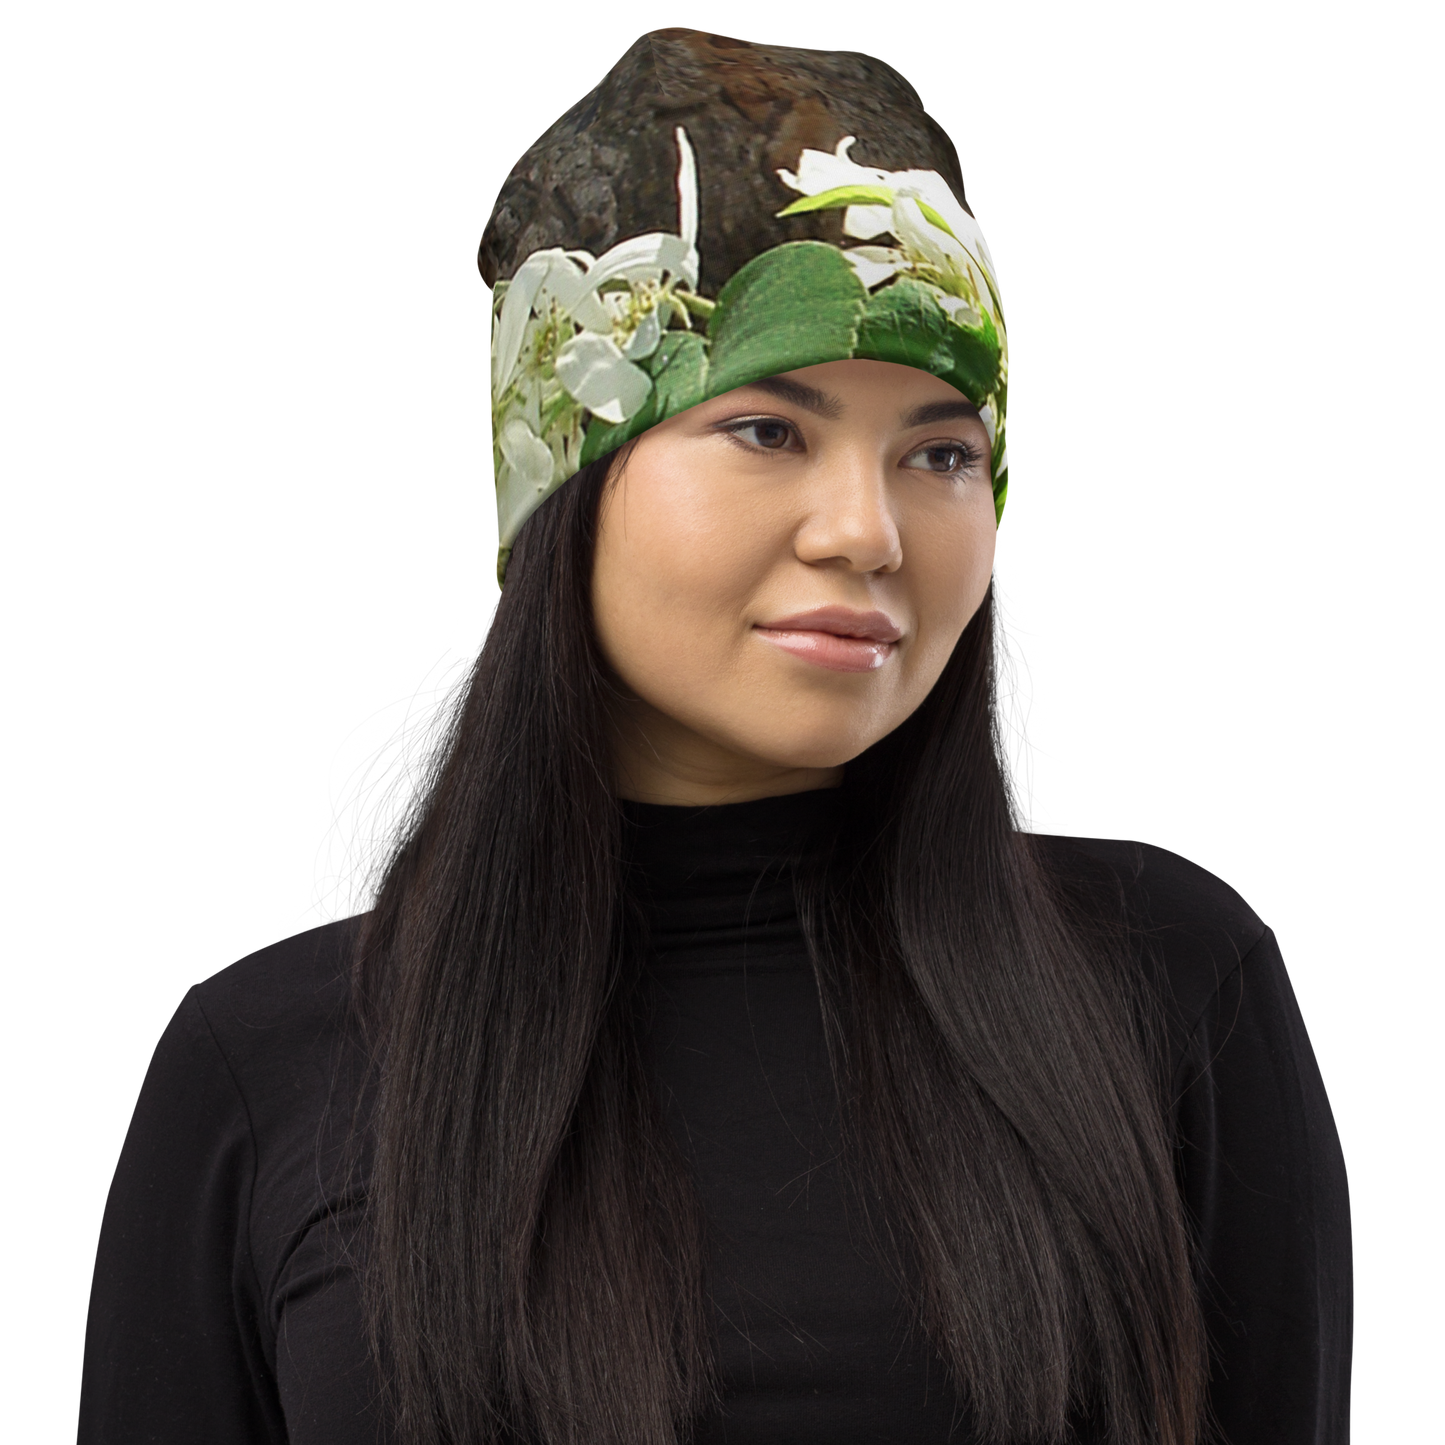 The EARTH LOVE Collection - "Bark & Blossom Bliss" Design Beanie - Lightweight, Cute Chemo Hat